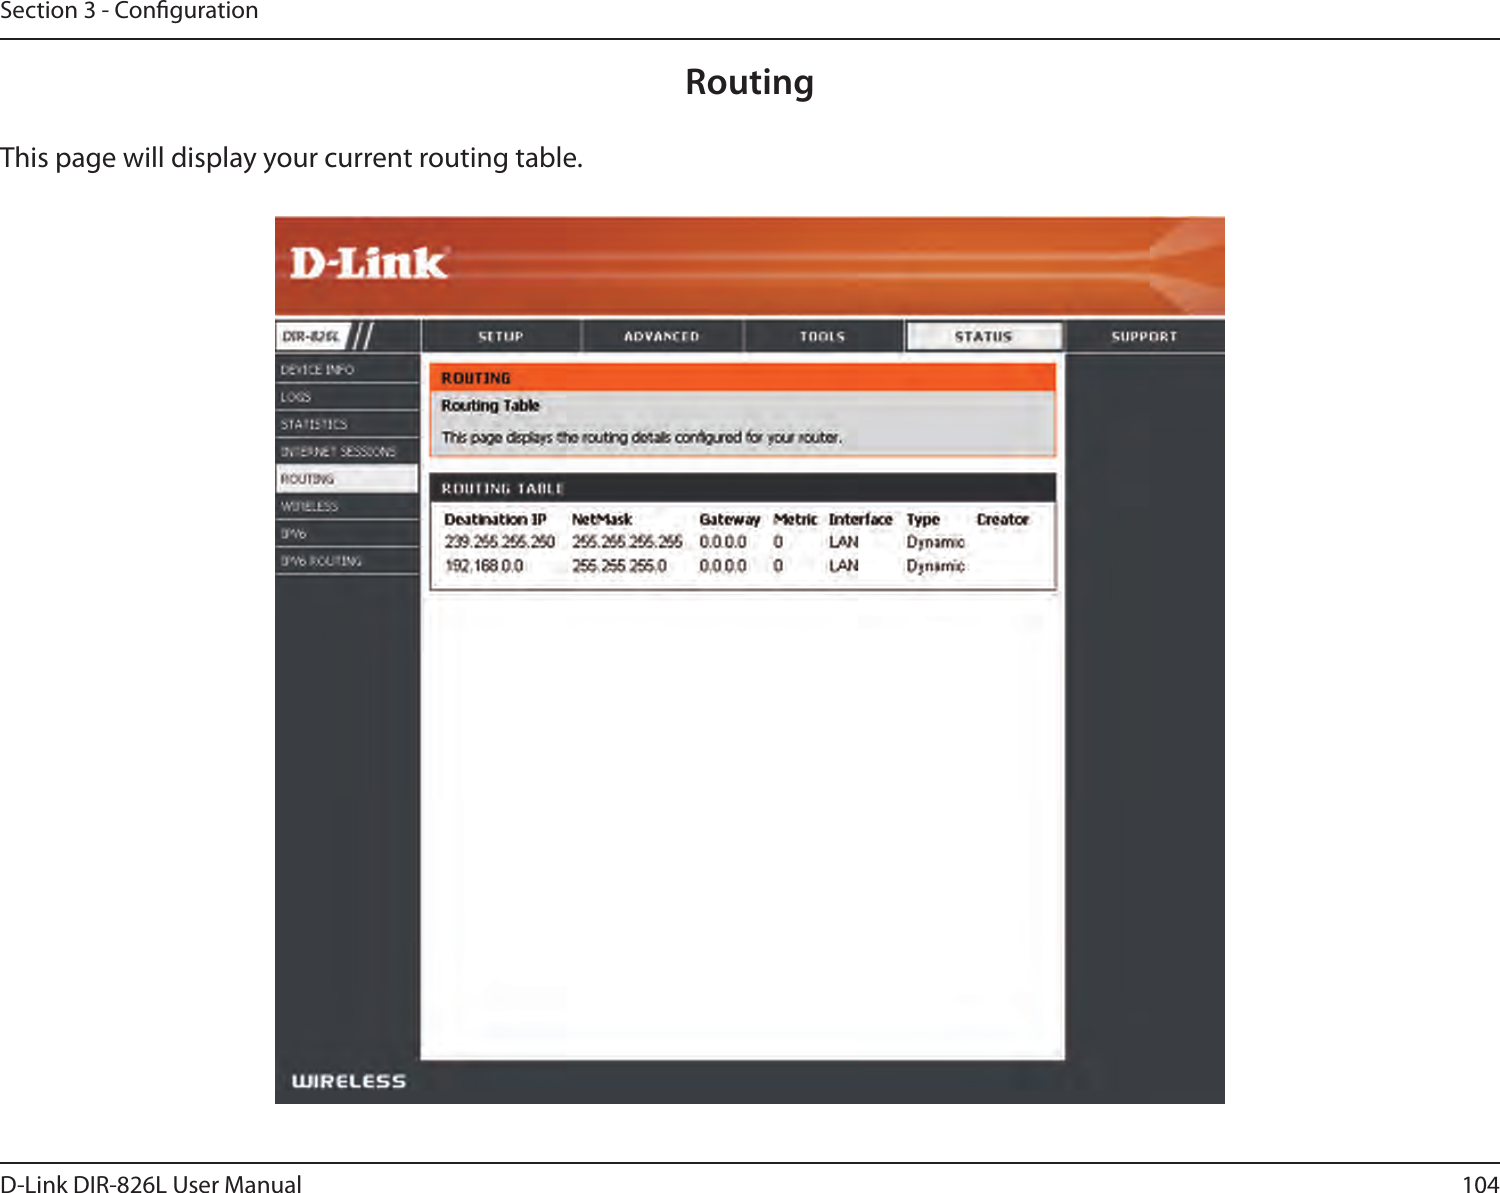 104D-Link DIR-826L User ManualSection 3 - CongurationRoutingThis page will display your current routing table.